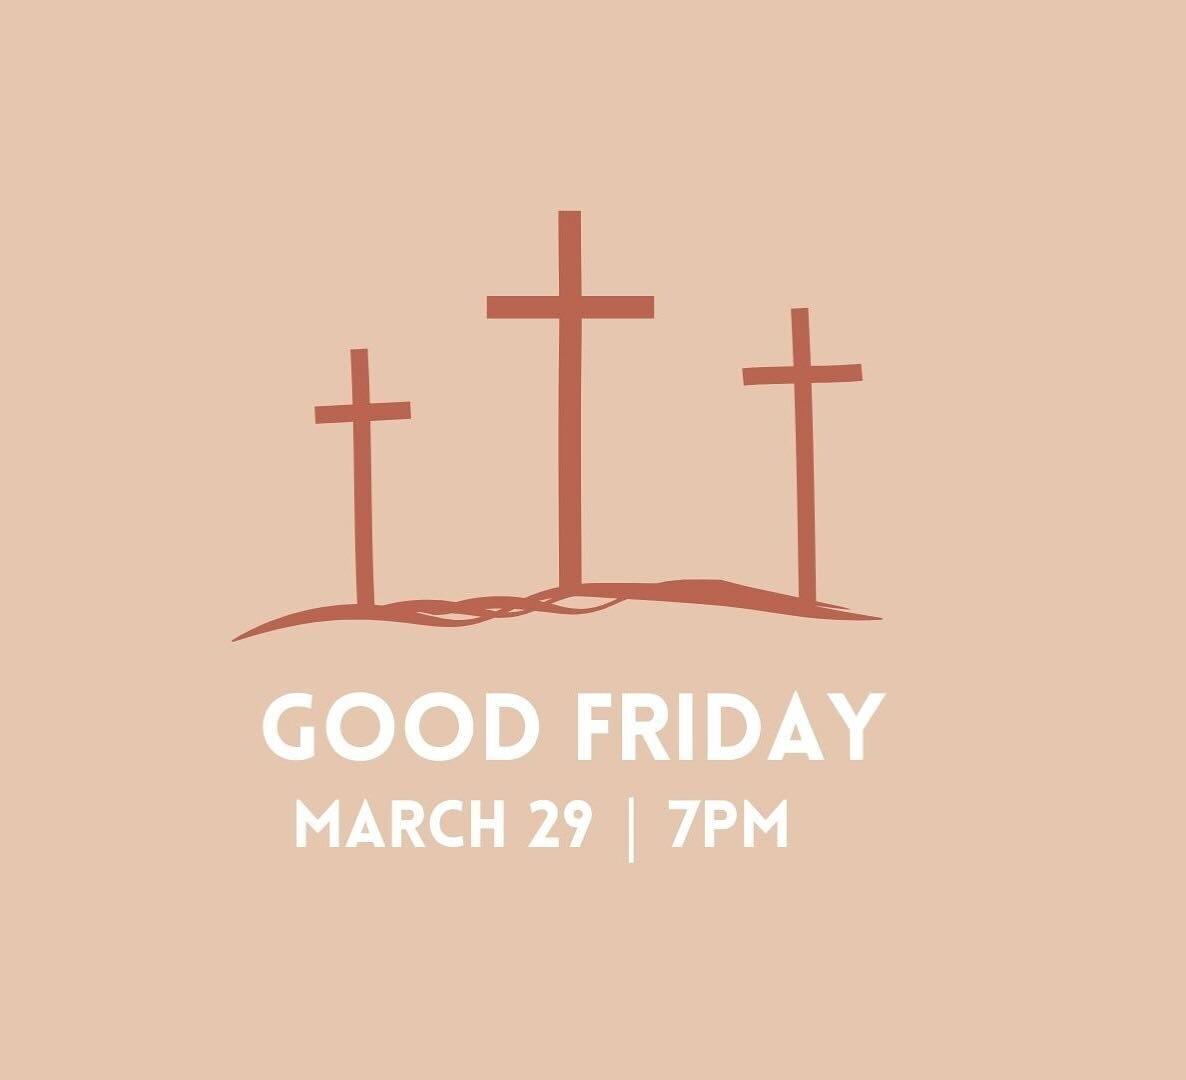 GOOD FRIDAY 😌
&mdash;
Good Friday is a turning-point for all of humanity&mdash;the day when we remember Jesus&rsquo; agonizing journey from the Garden of Gethsemane and then toward the cross. On this day we celebrate and remember his sacrifice and t